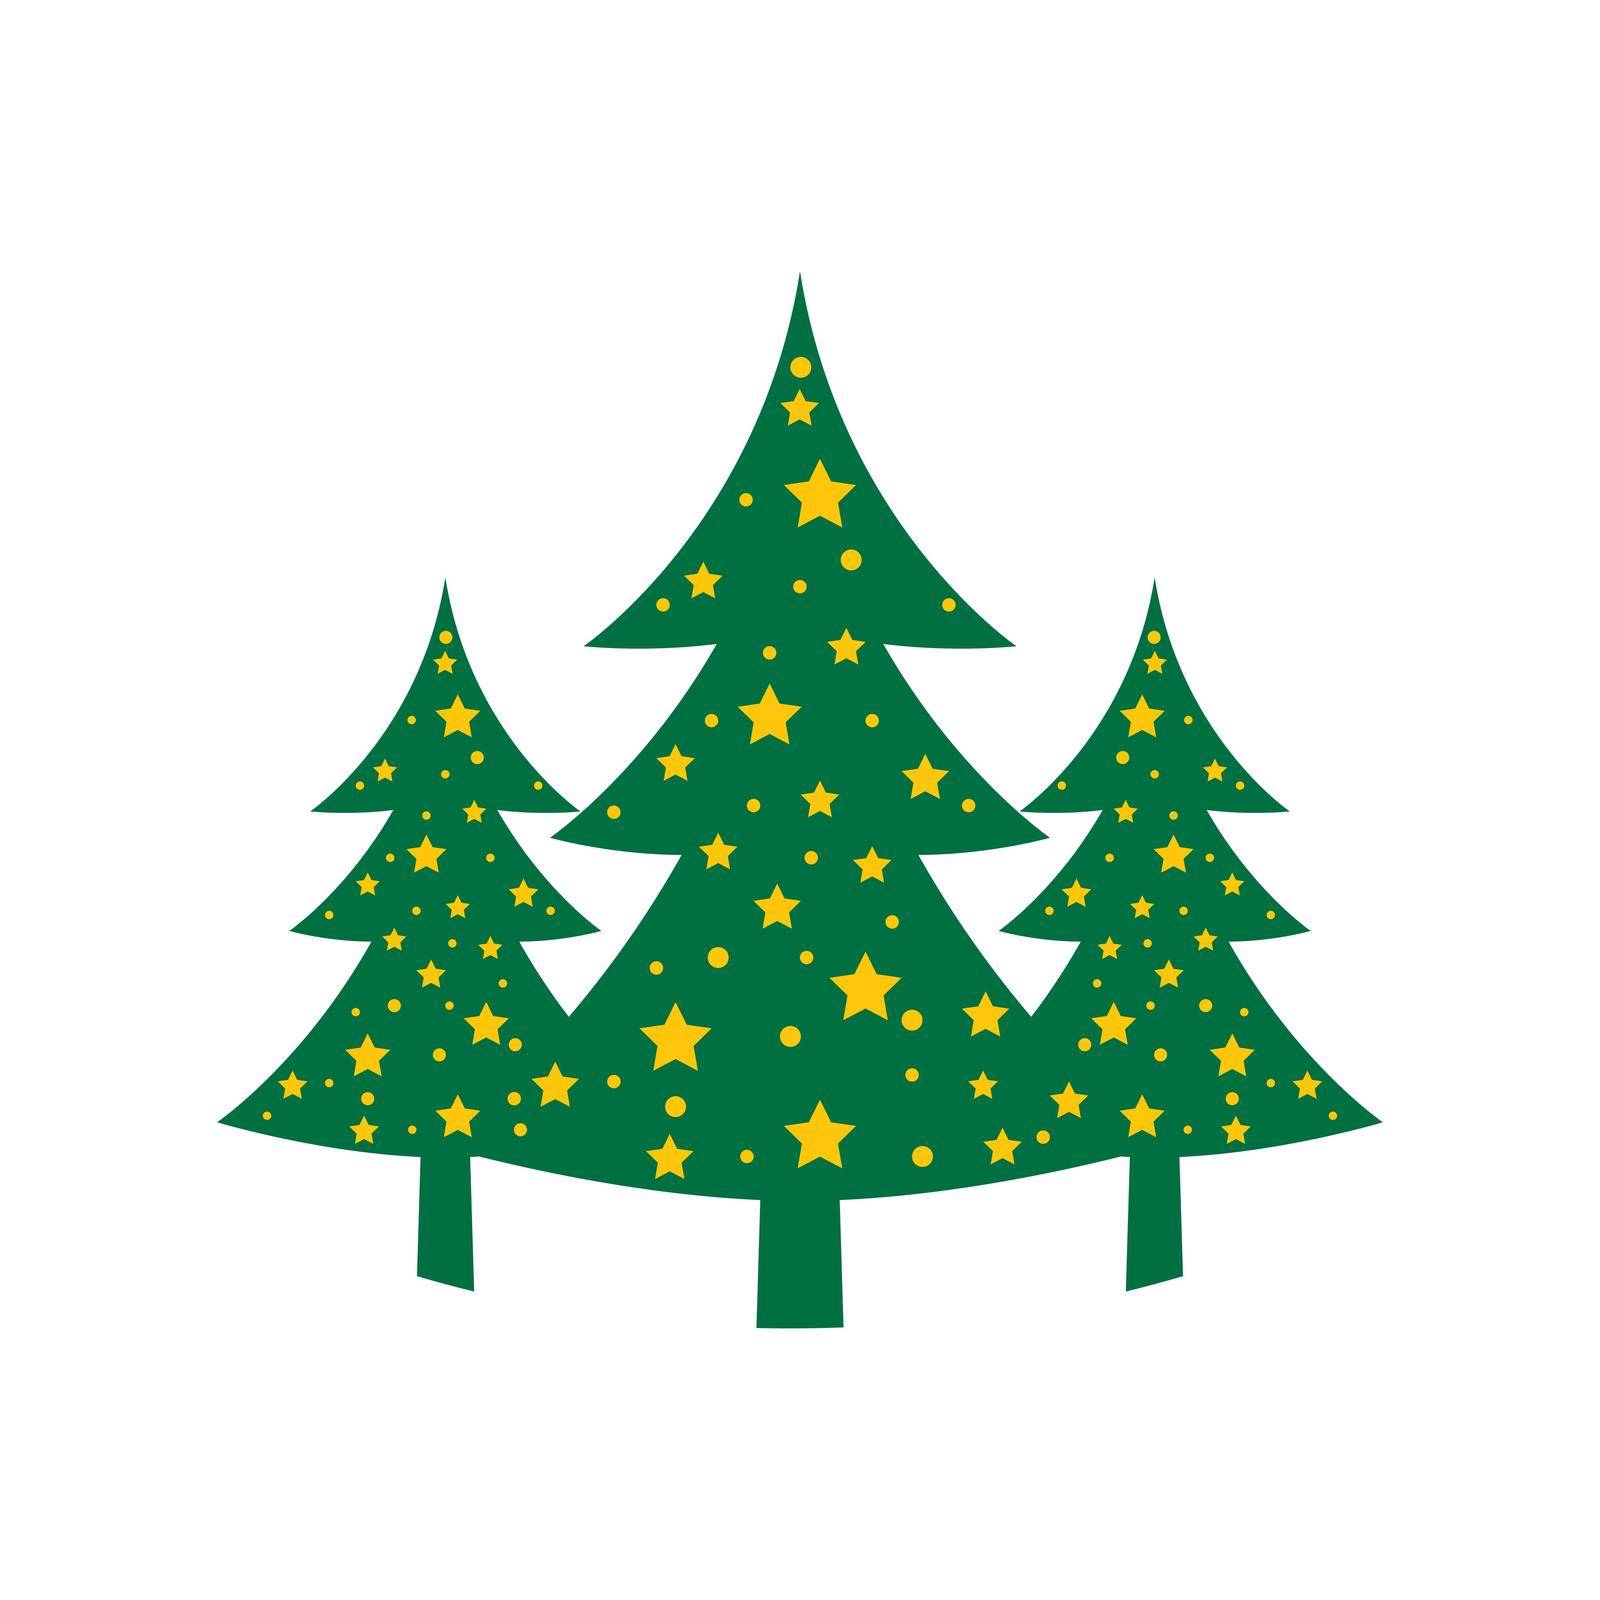 Pine tree illustration by awk